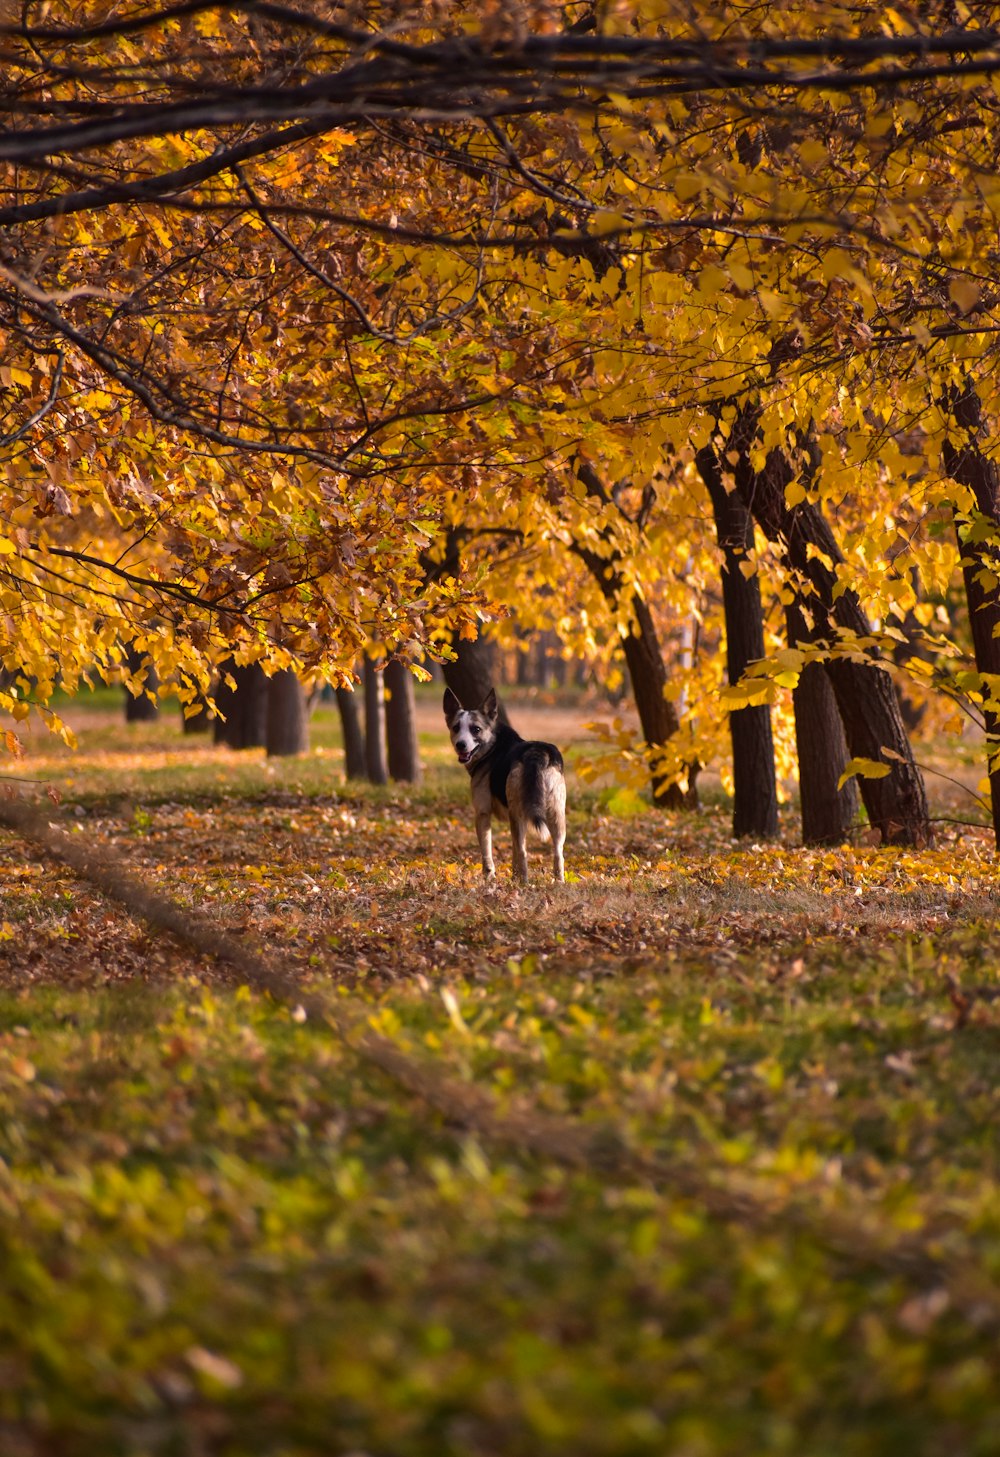 a dog standing under a tree filled with yellow leaves